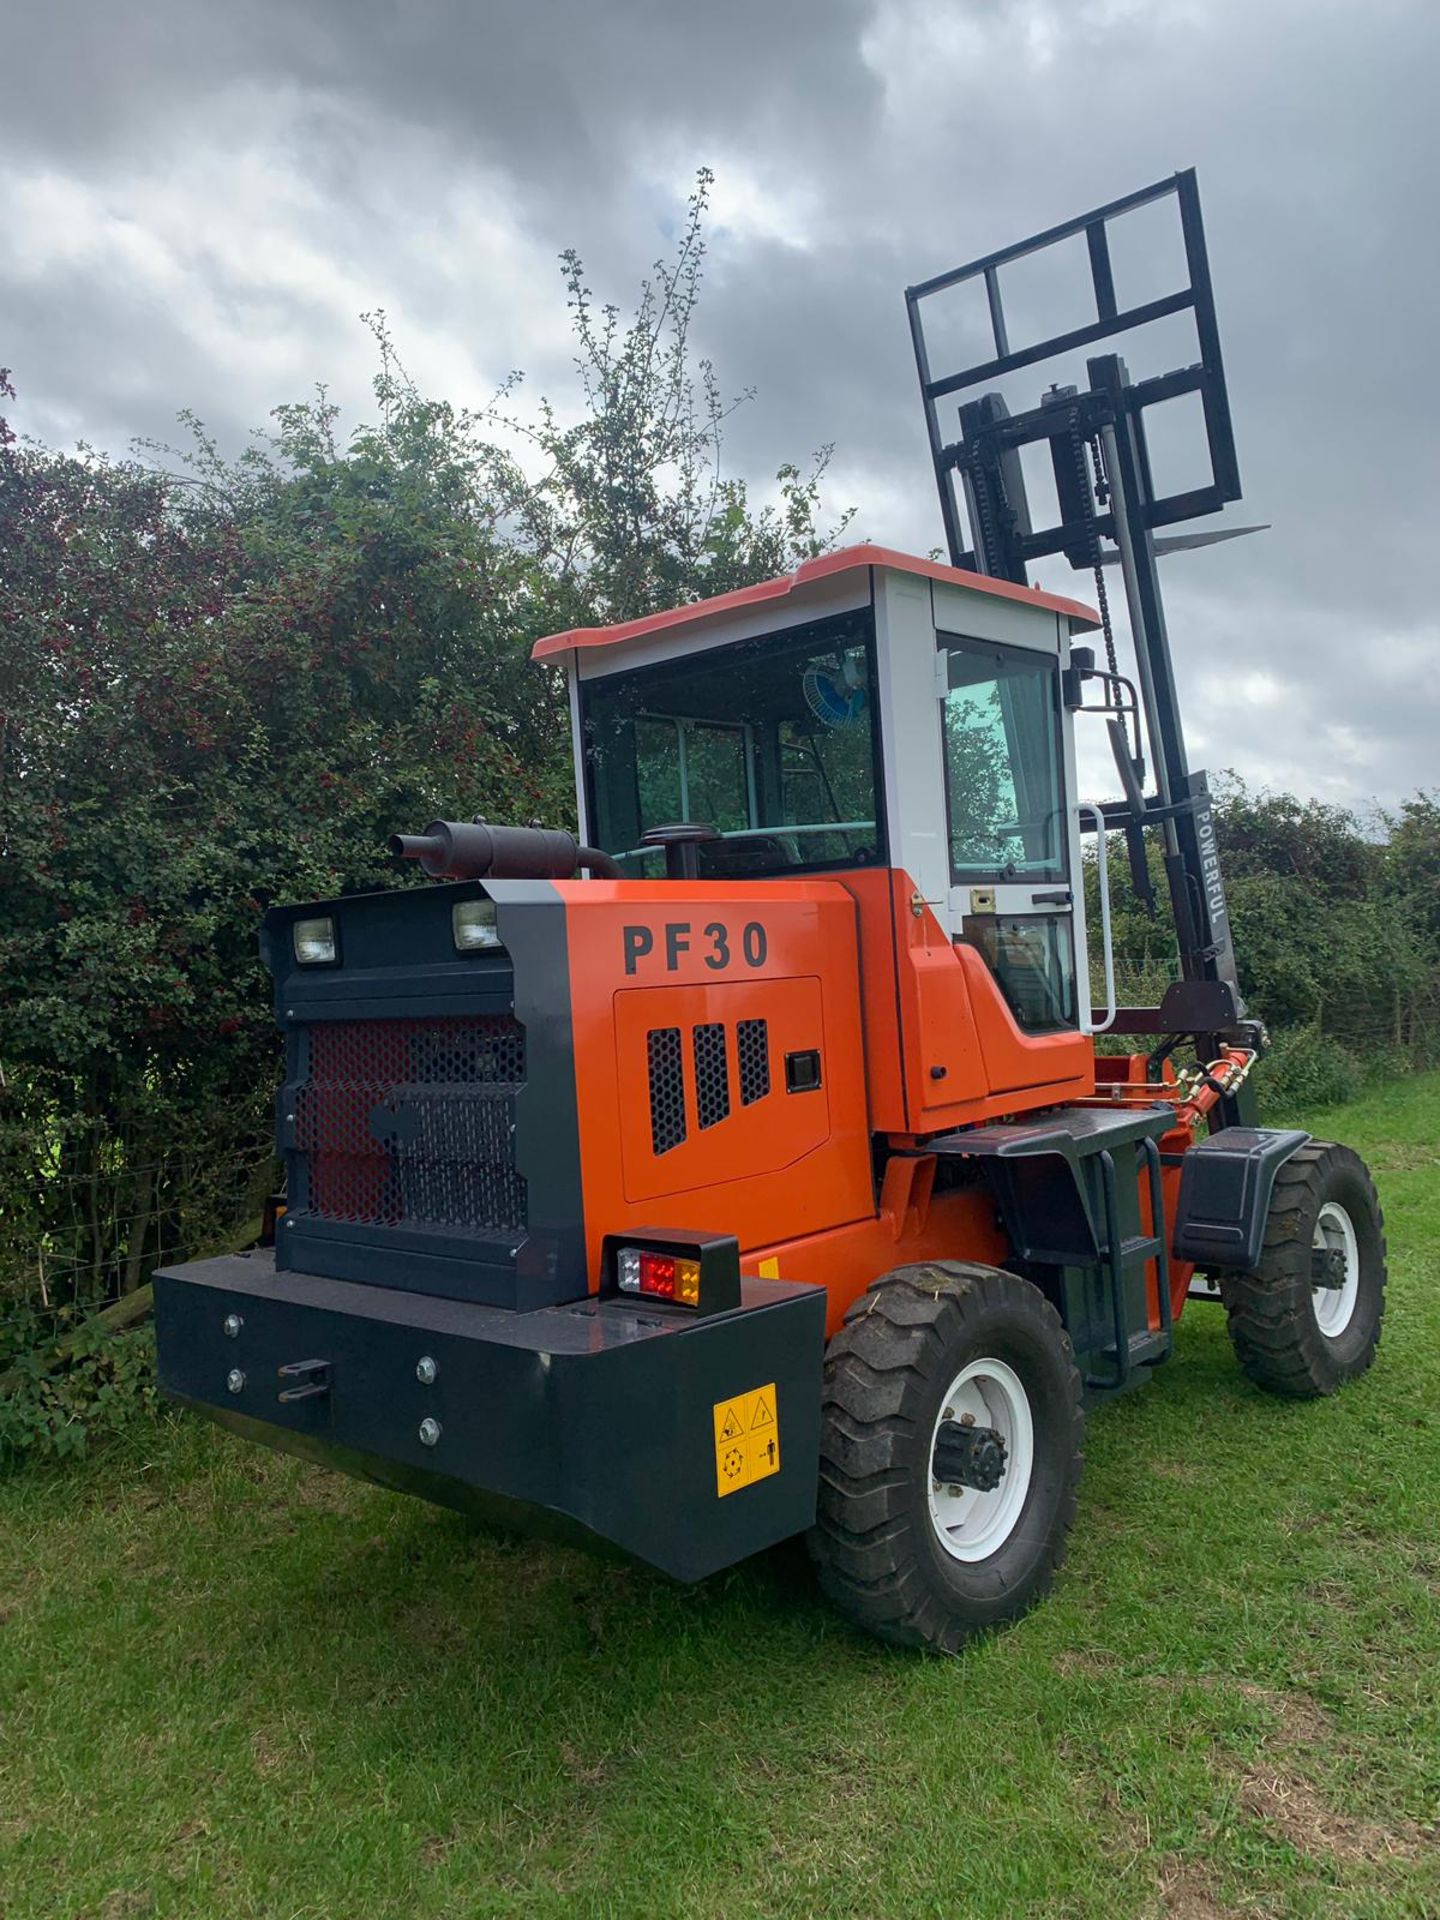 BRAND NEW 2019 ATTACK PF30 4X4 ROUGH TERRAIN POWERFUL FORKLIFT C/W 2 STAGE MAST *PLUS VAT* - Image 4 of 12